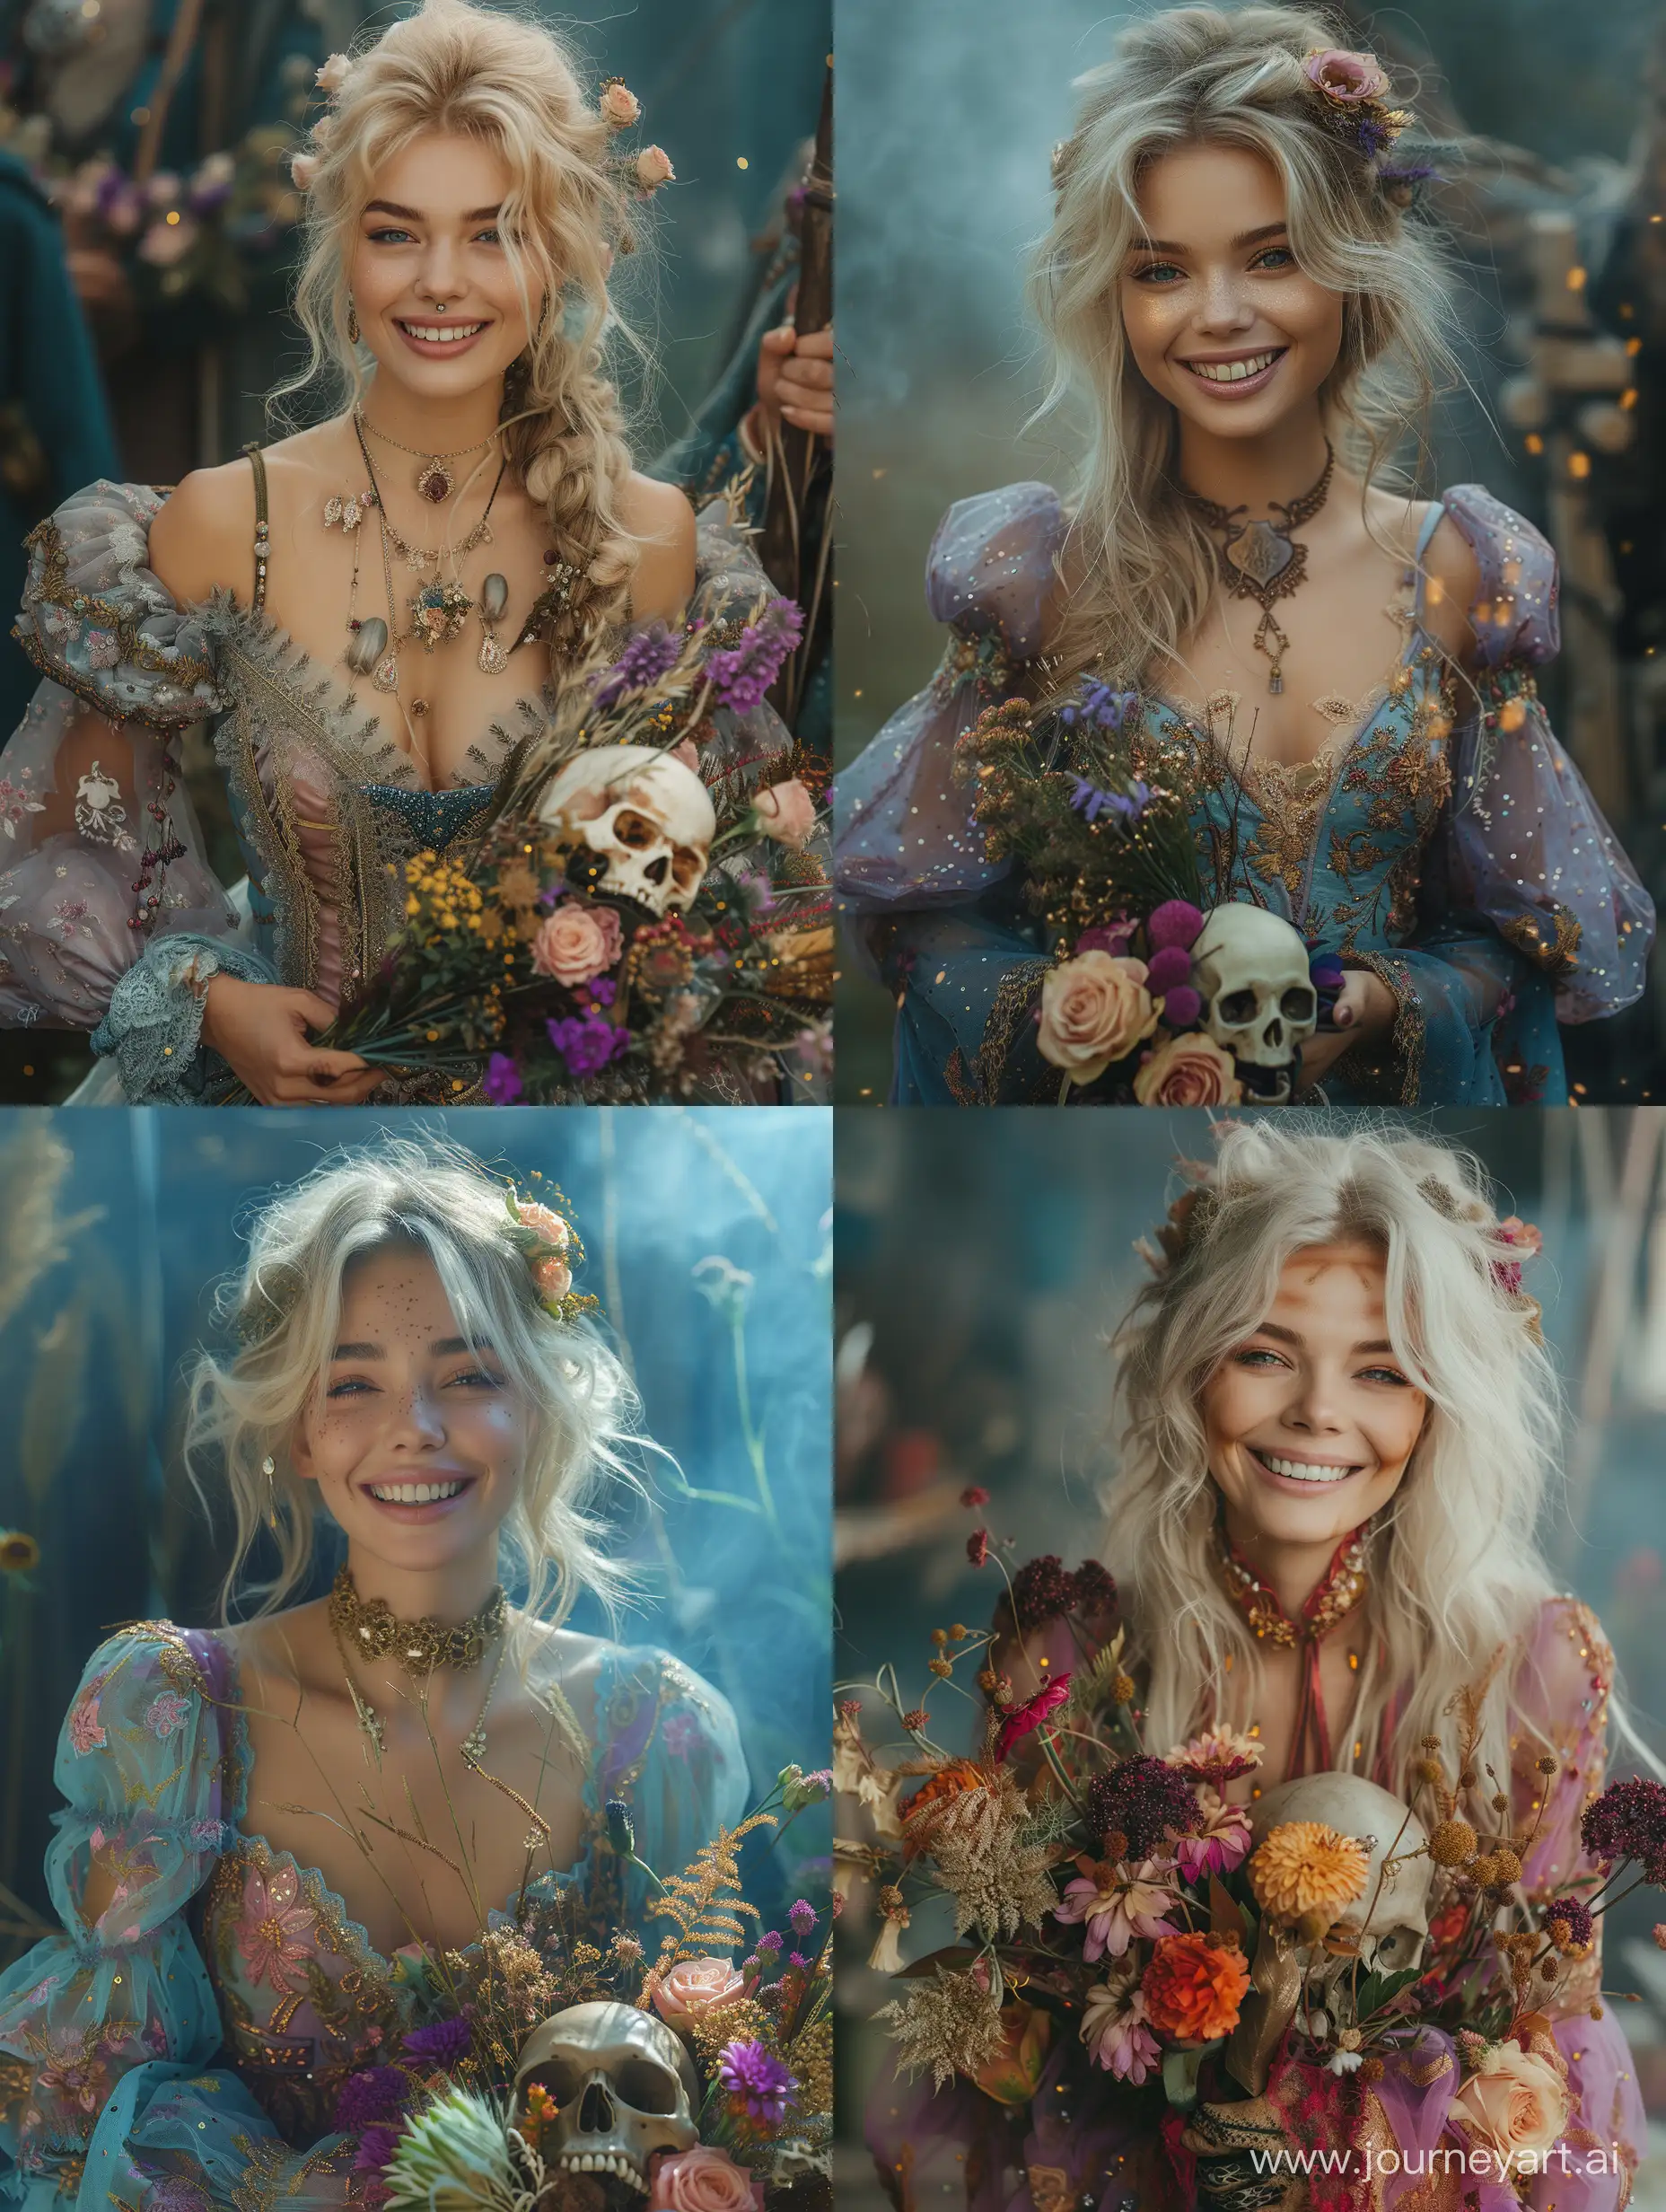 Mystical-Blonde-Witch-in-Russian-Dress-Holding-Flowers-and-Skull